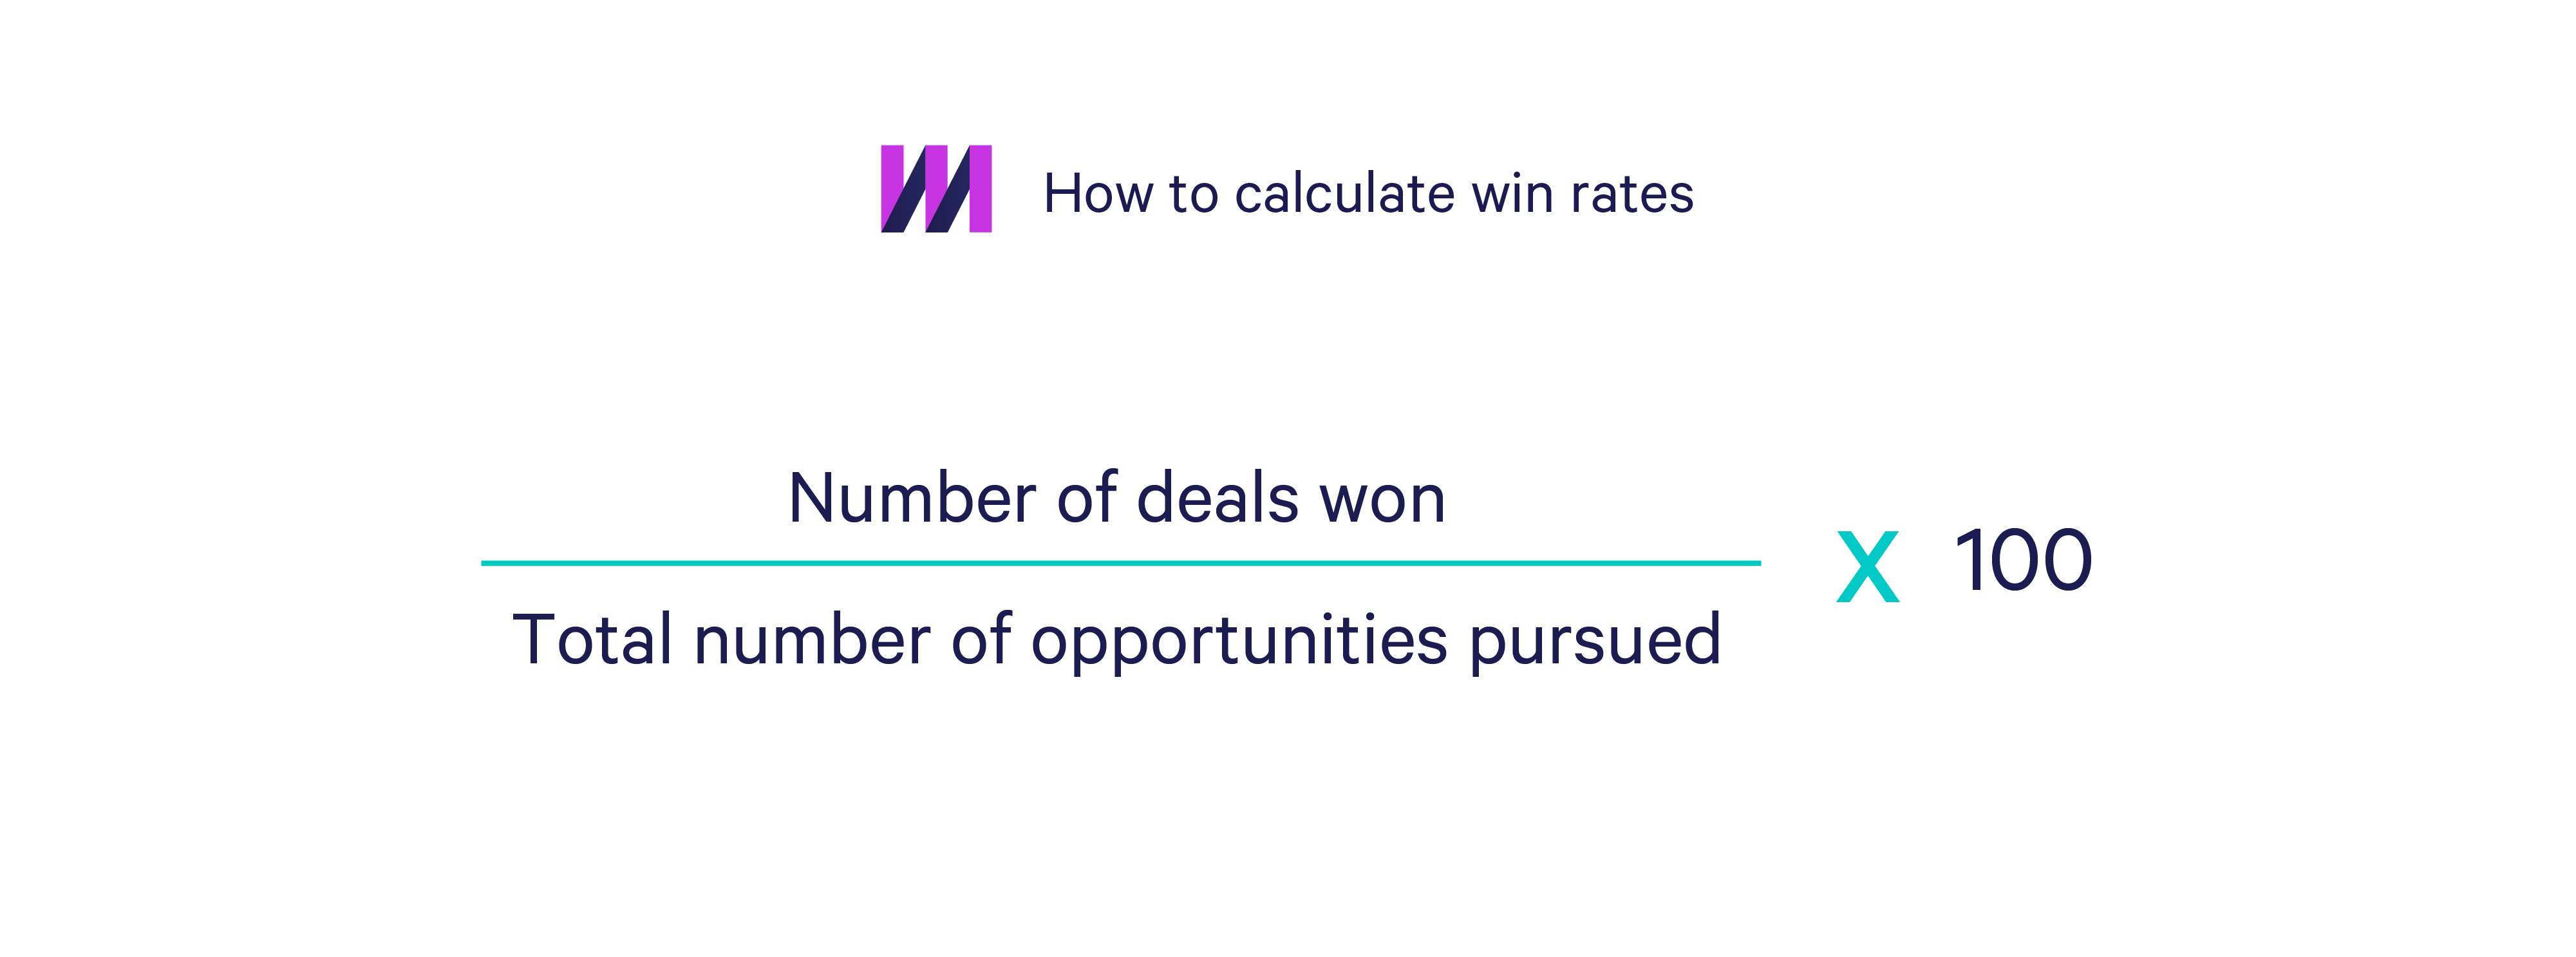 How to calculate win rates